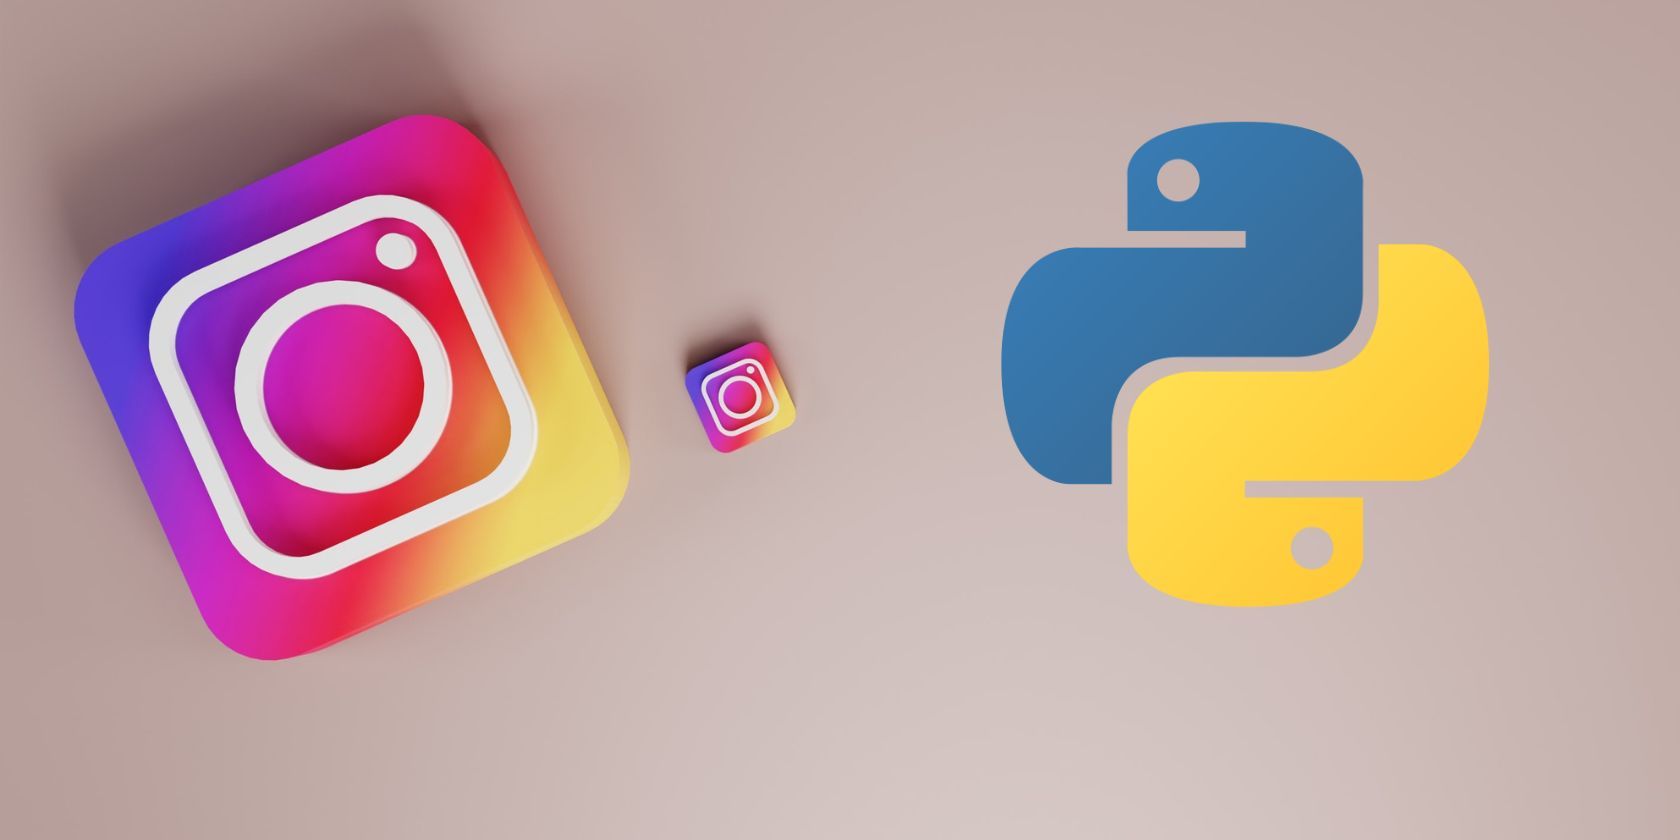 How to Fetch Data From Instagram Using Python